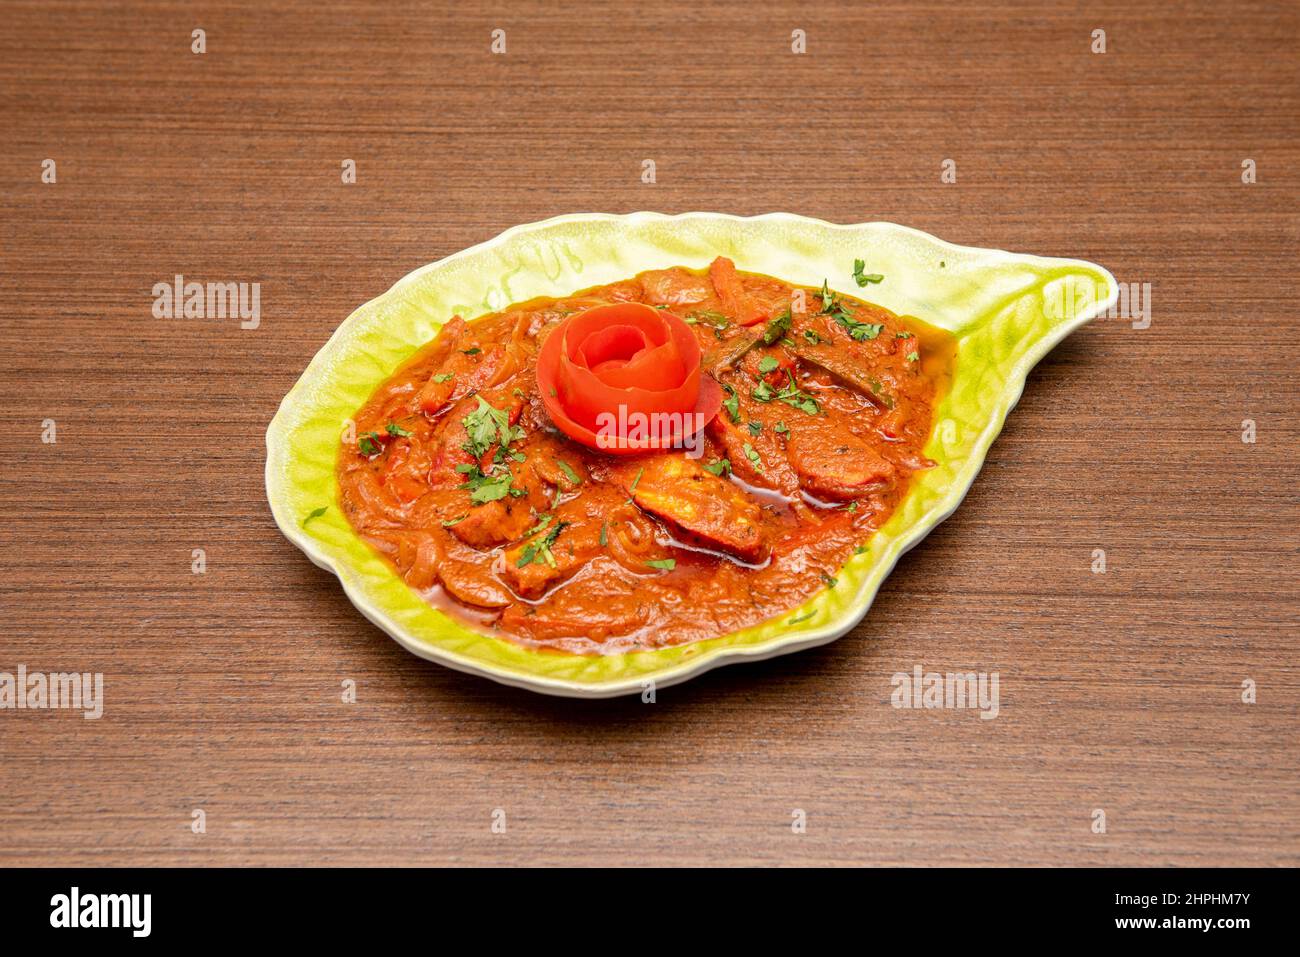 Jalfrezi is a typical Indian curry made from minced meat and vegetables, usually peppers, onions and tomatoes, and spices. Stock Photo